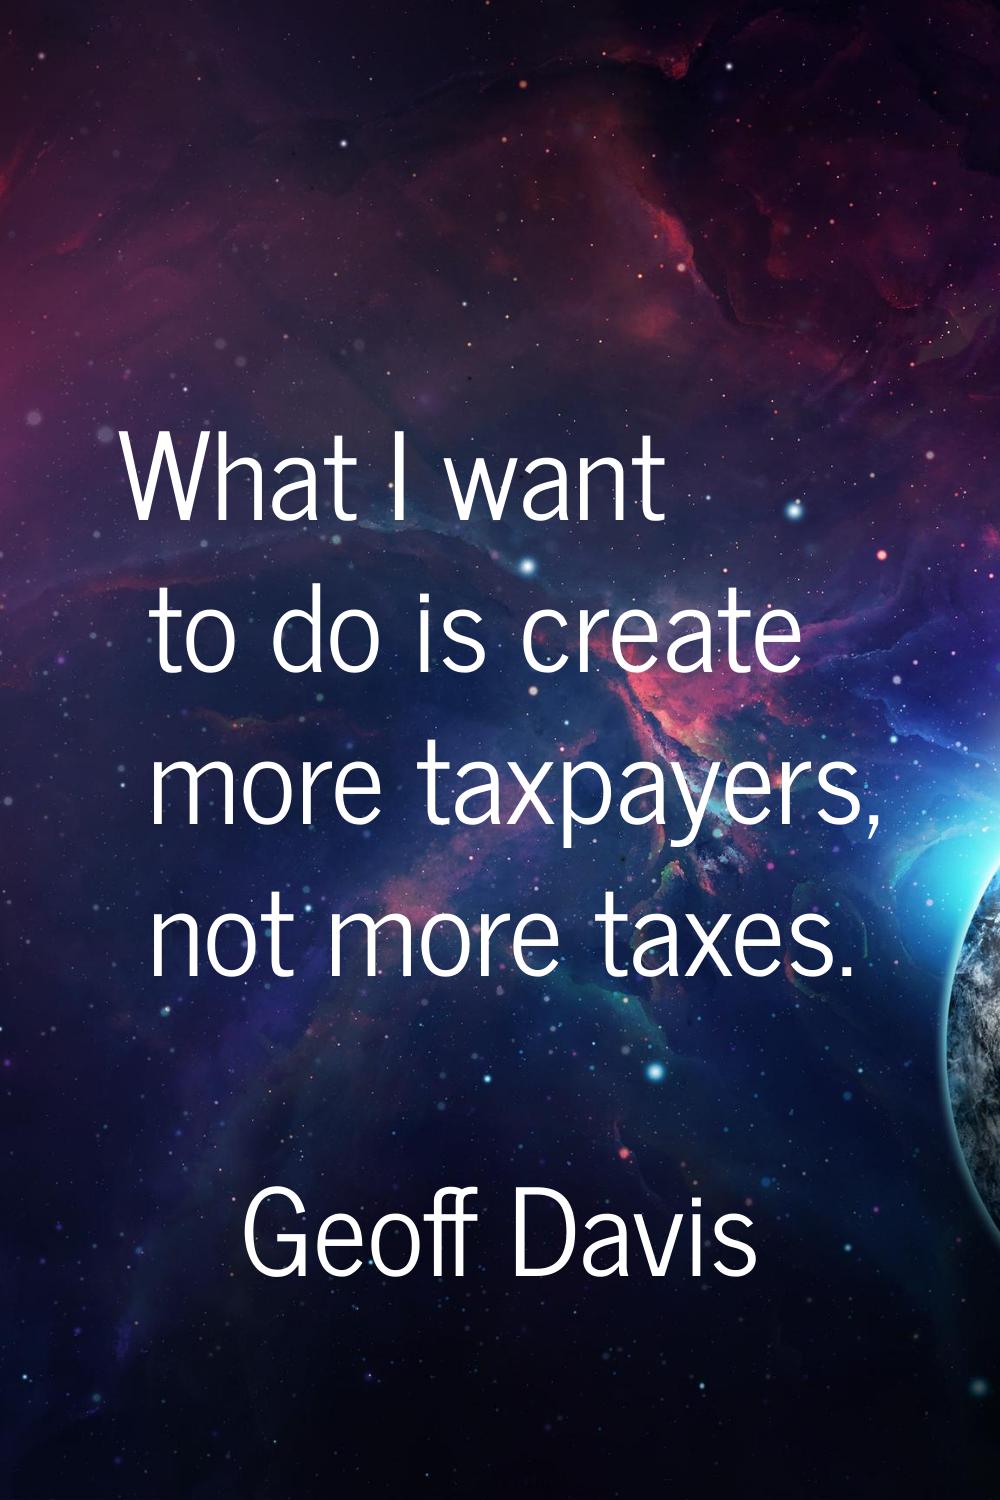 What I want to do is create more taxpayers, not more taxes.